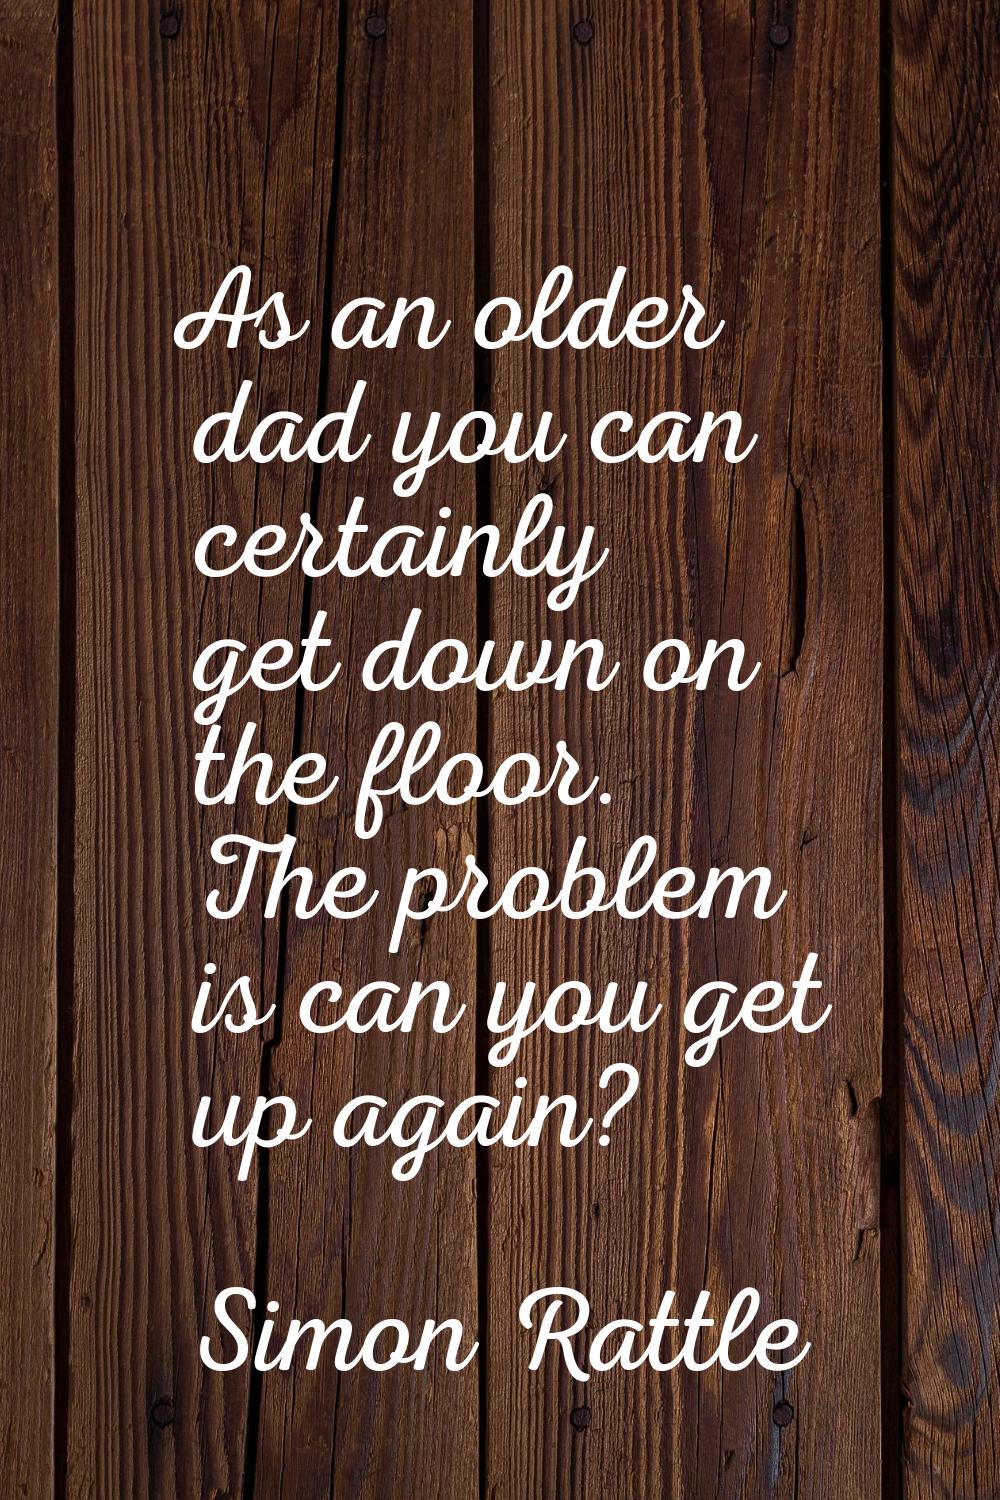 As an older dad you can certainly get down on the floor. The problem is can you get up again?